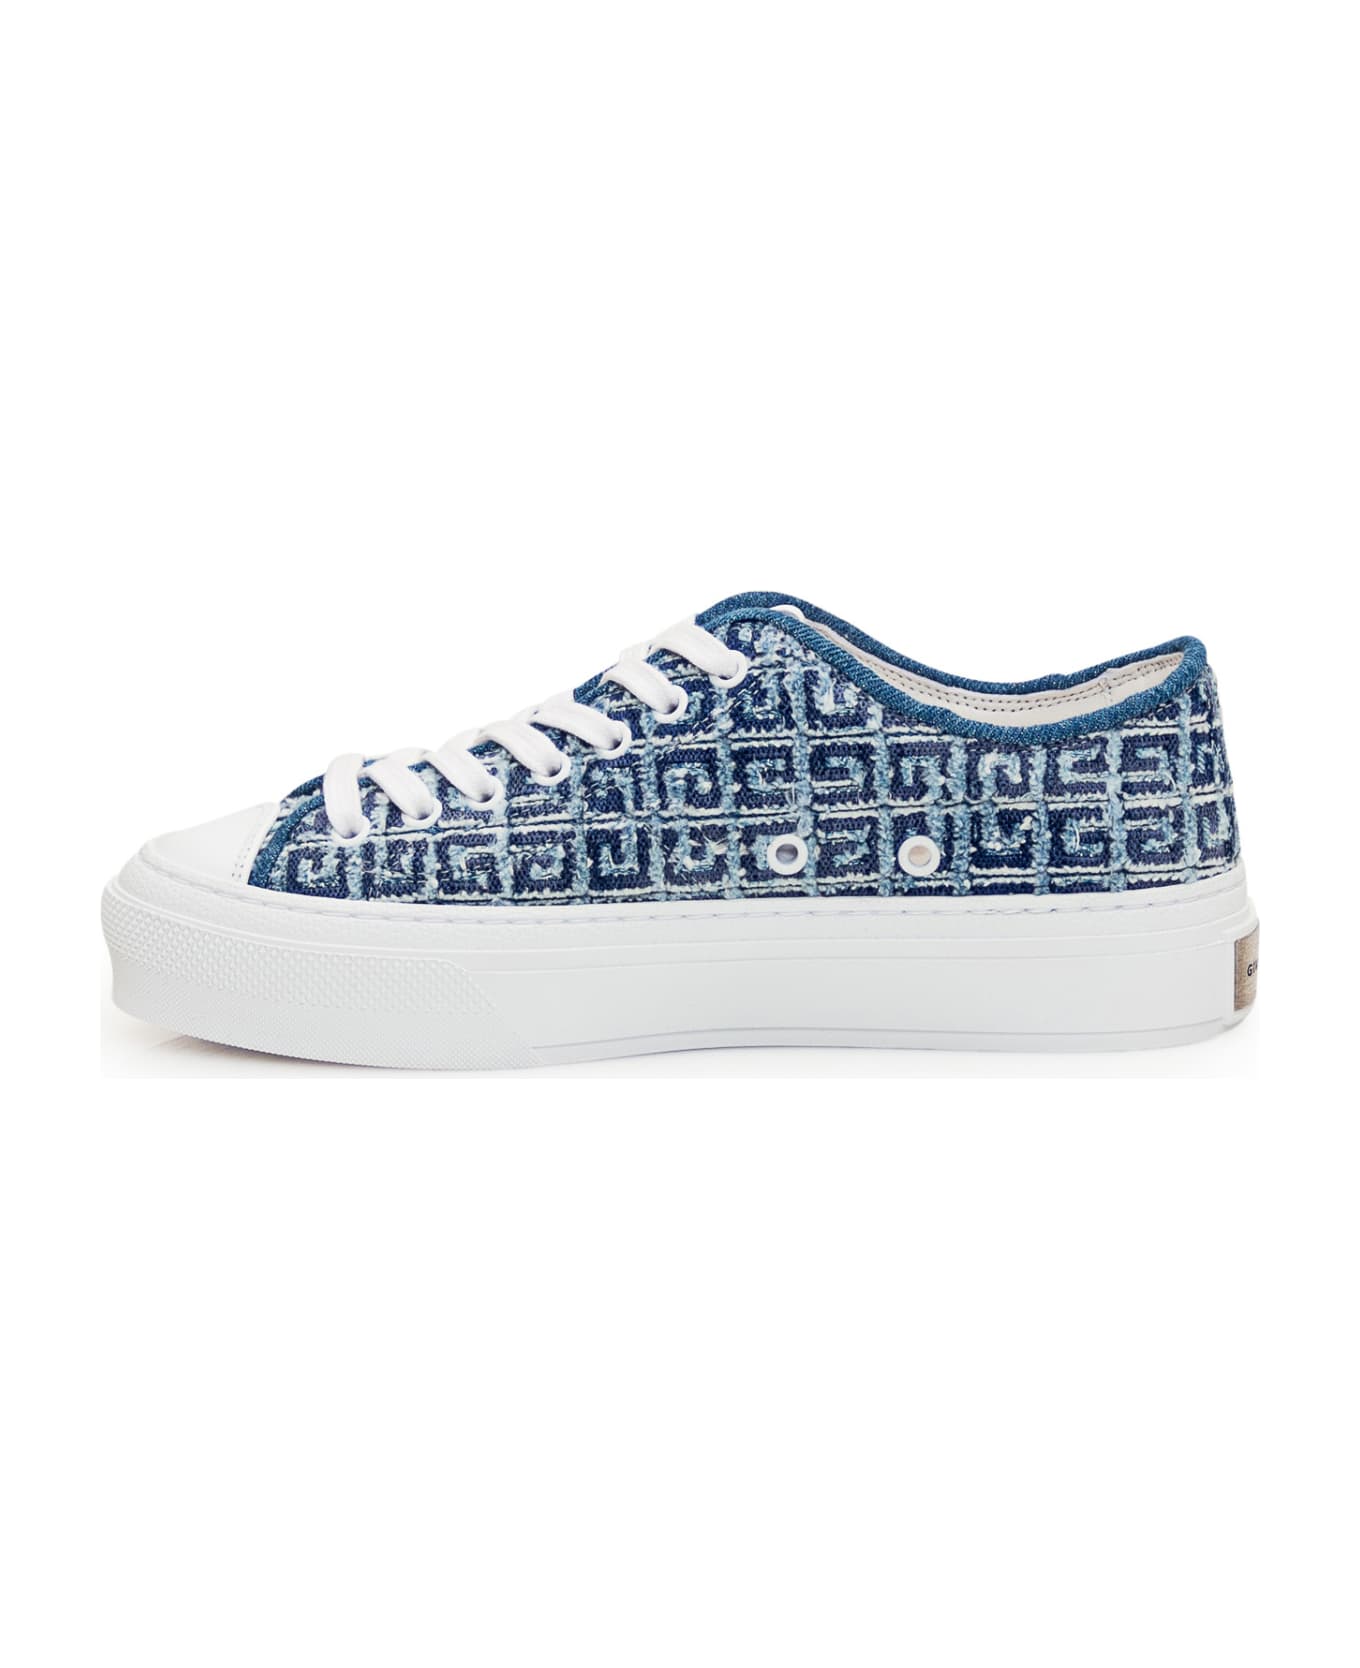 Givenchy City Low Sneakers - MEDIUM BLUE スニーカー